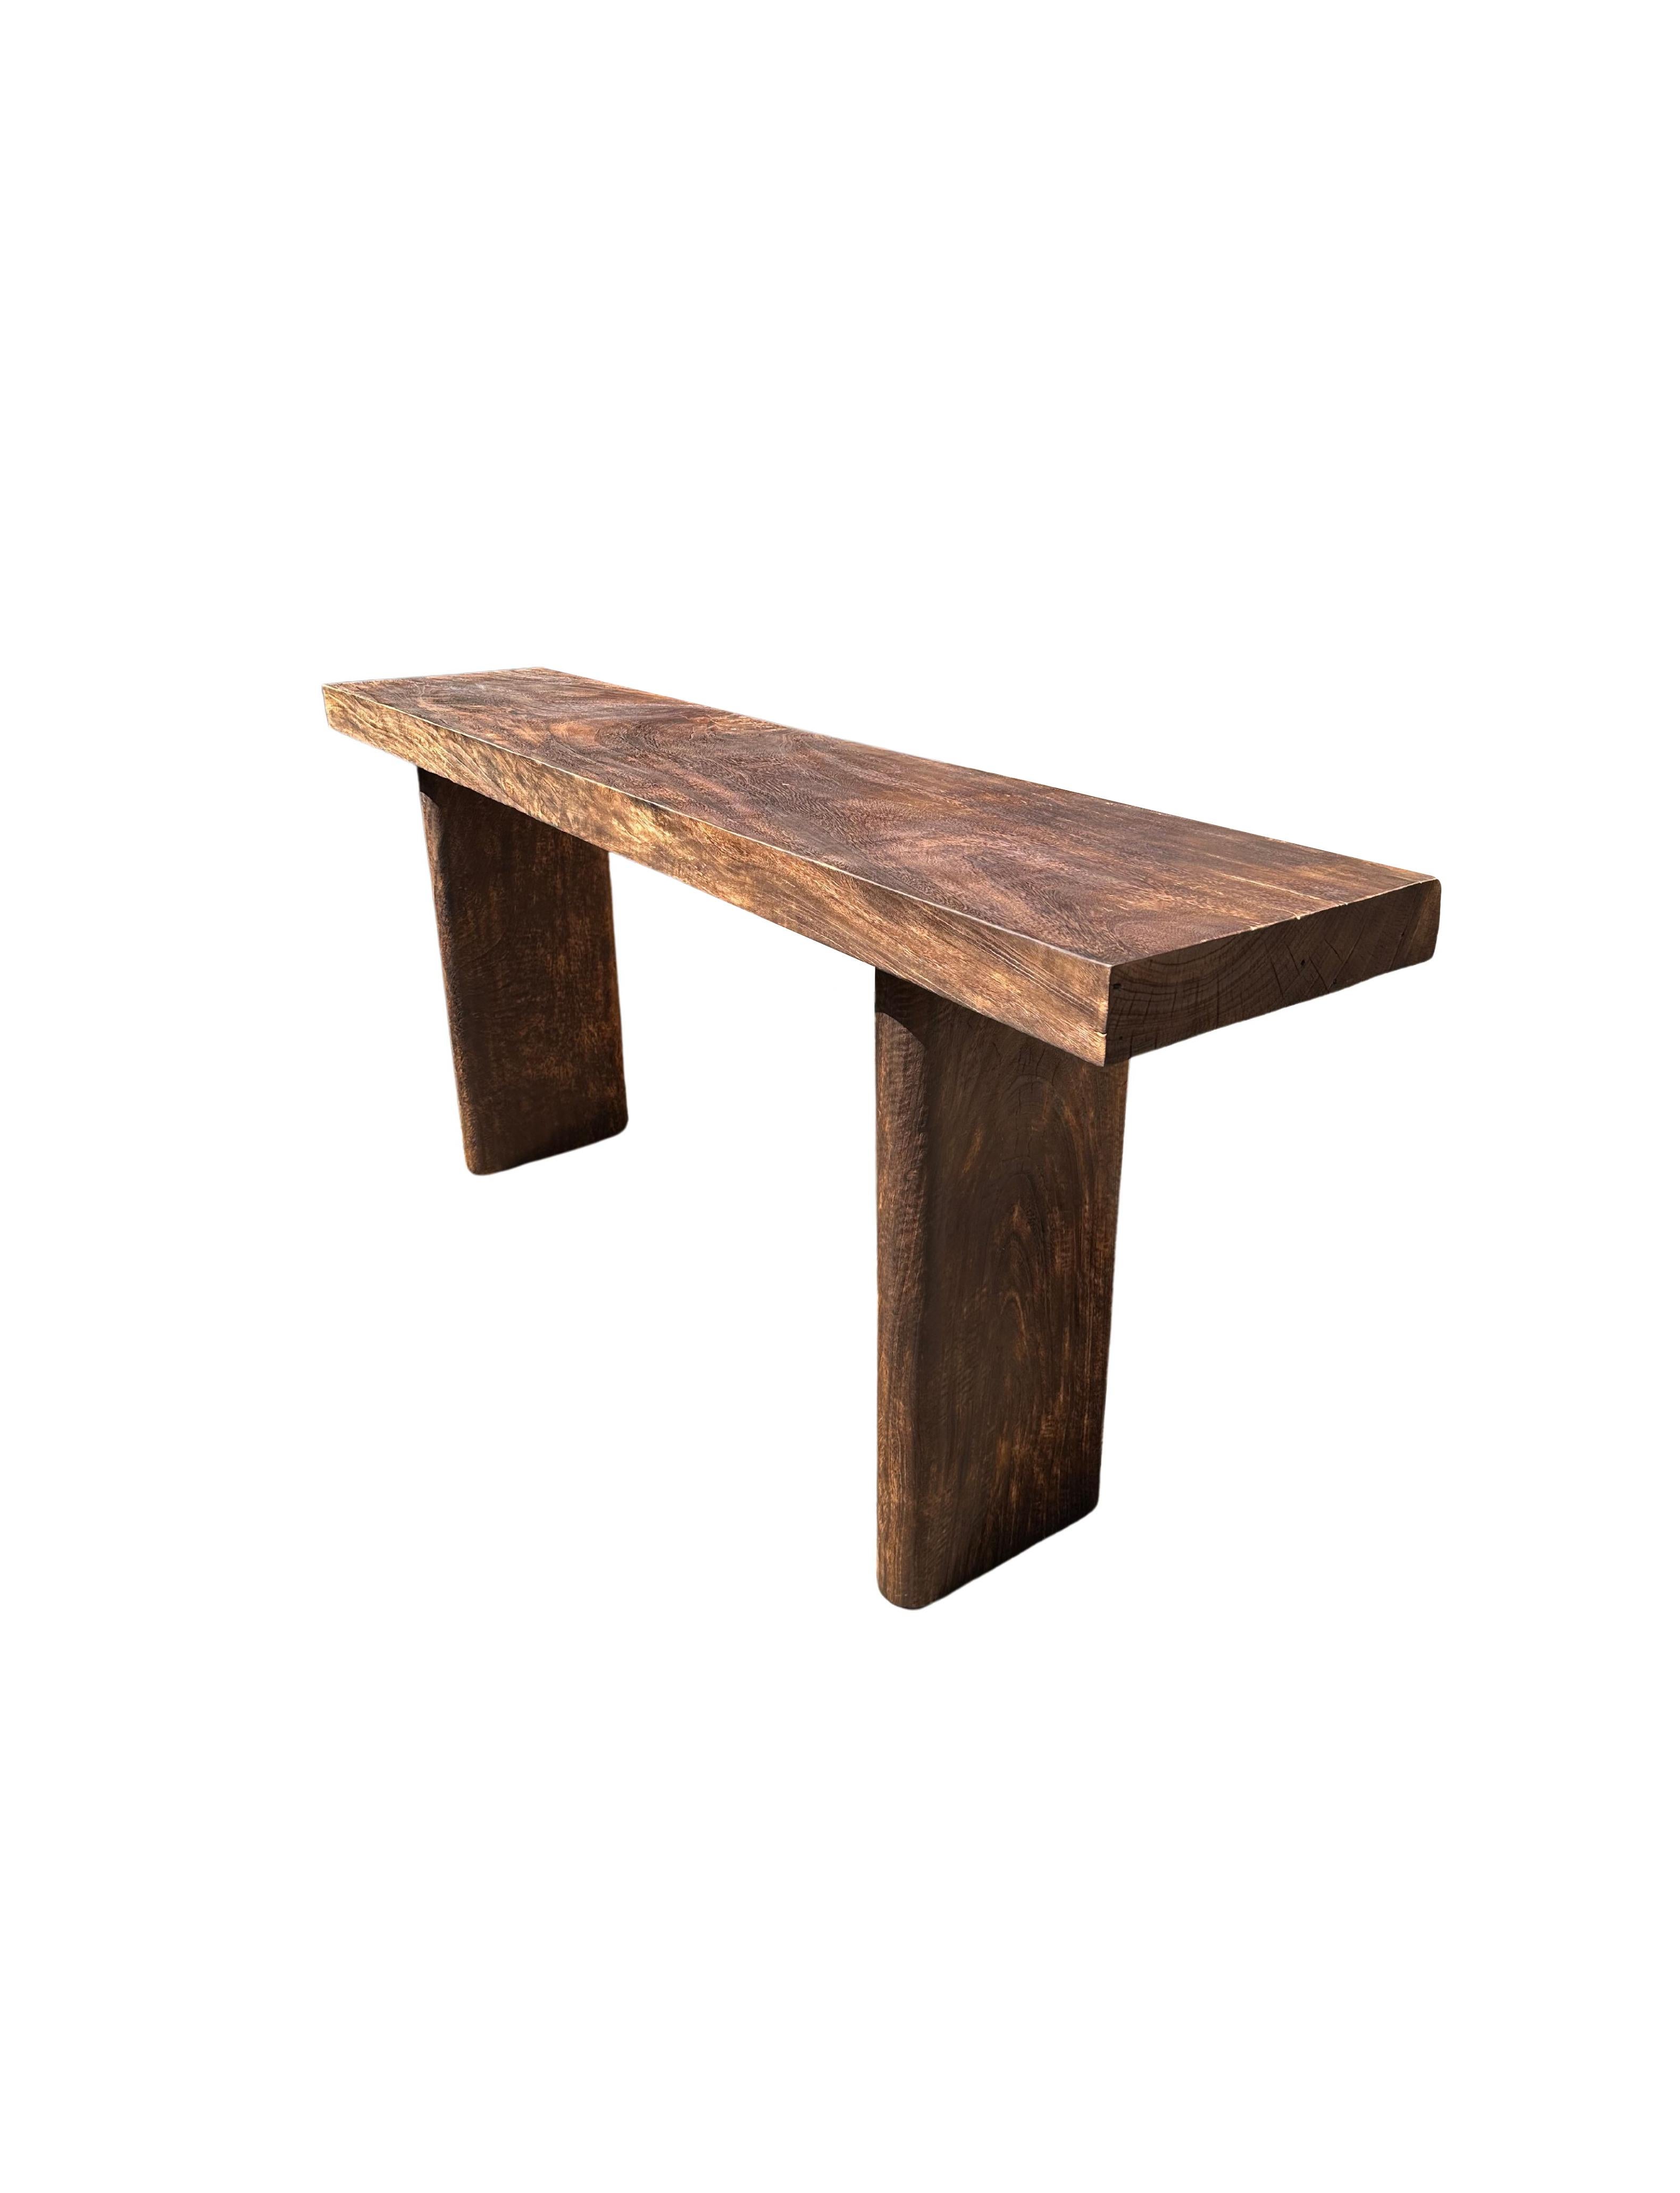 A sculptural mango wood console table crafted from a solid block of mango wood. The table top sits atop two solid, narrow legs. The tables legs feature curved edges providing a wonderful mix of curved and straight lines to the table. A wonderfully